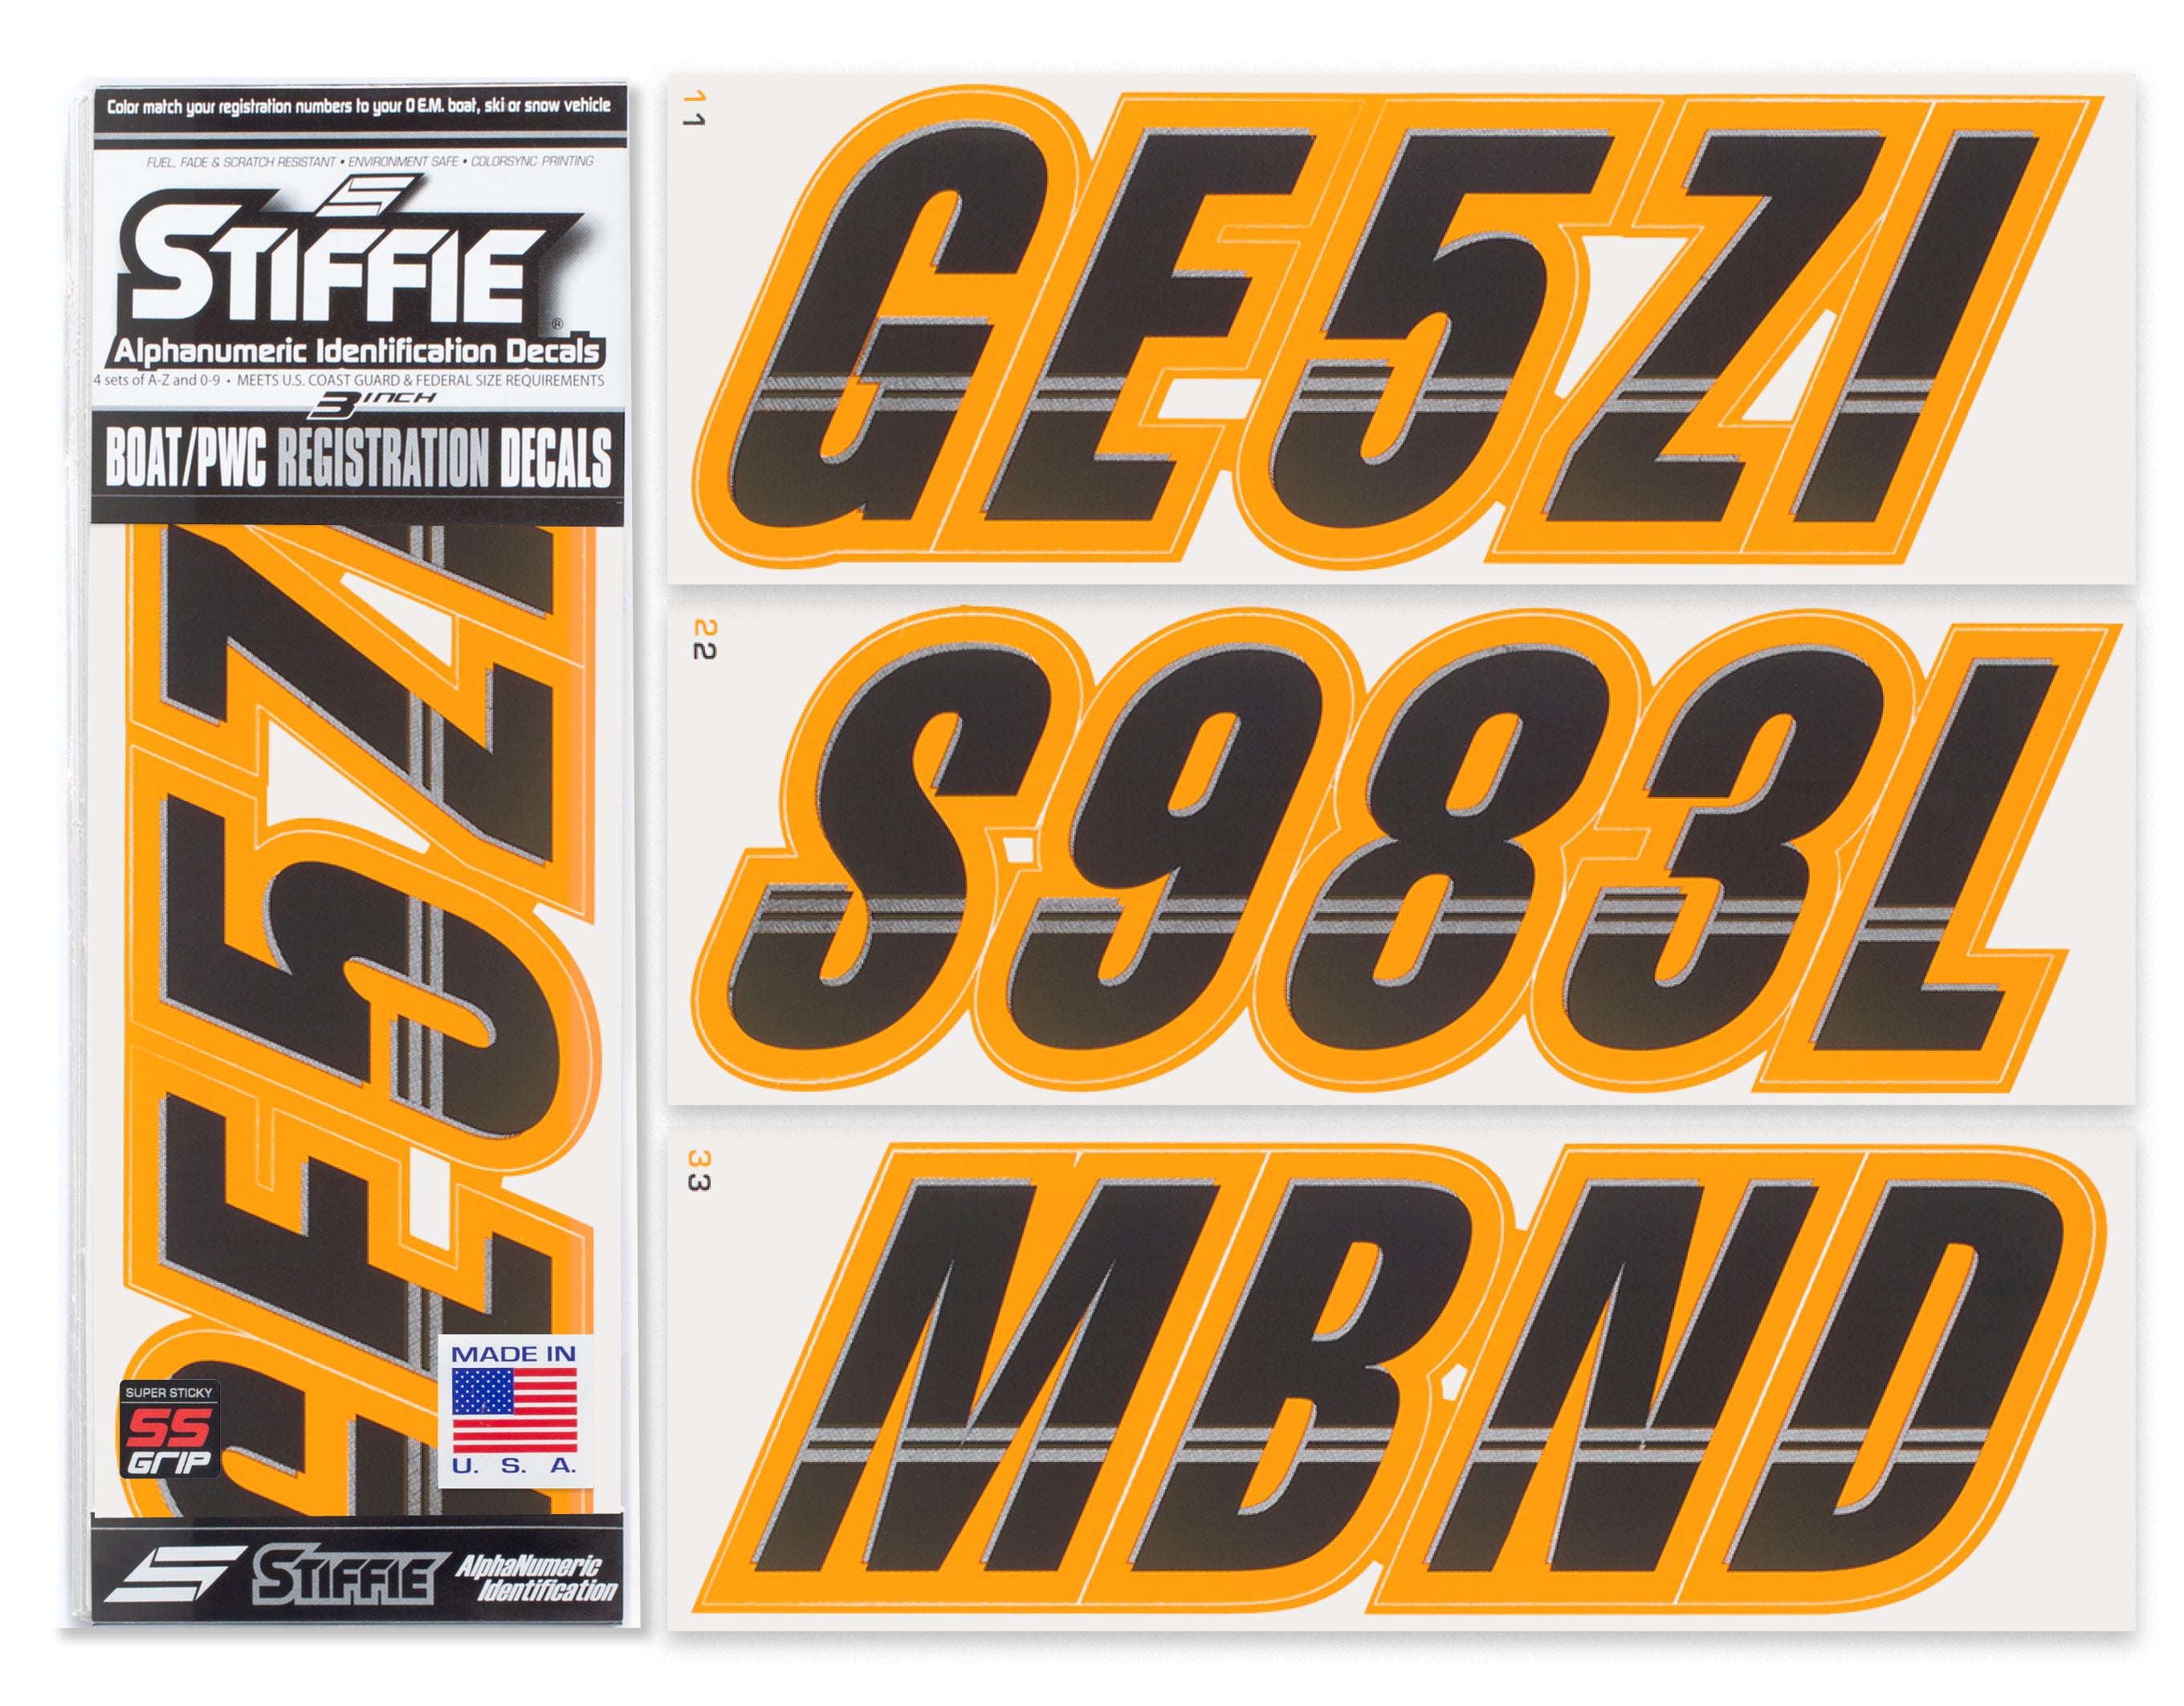 Stiffie Techtron Black/Orange Crush Super Sticky 3" Alpha Numeric Registration Identification Numbers Stickers Decals for Sea-Doo Spark, Inflatable Boats, Ribs, Hypalon/PVC, PWC and Boats